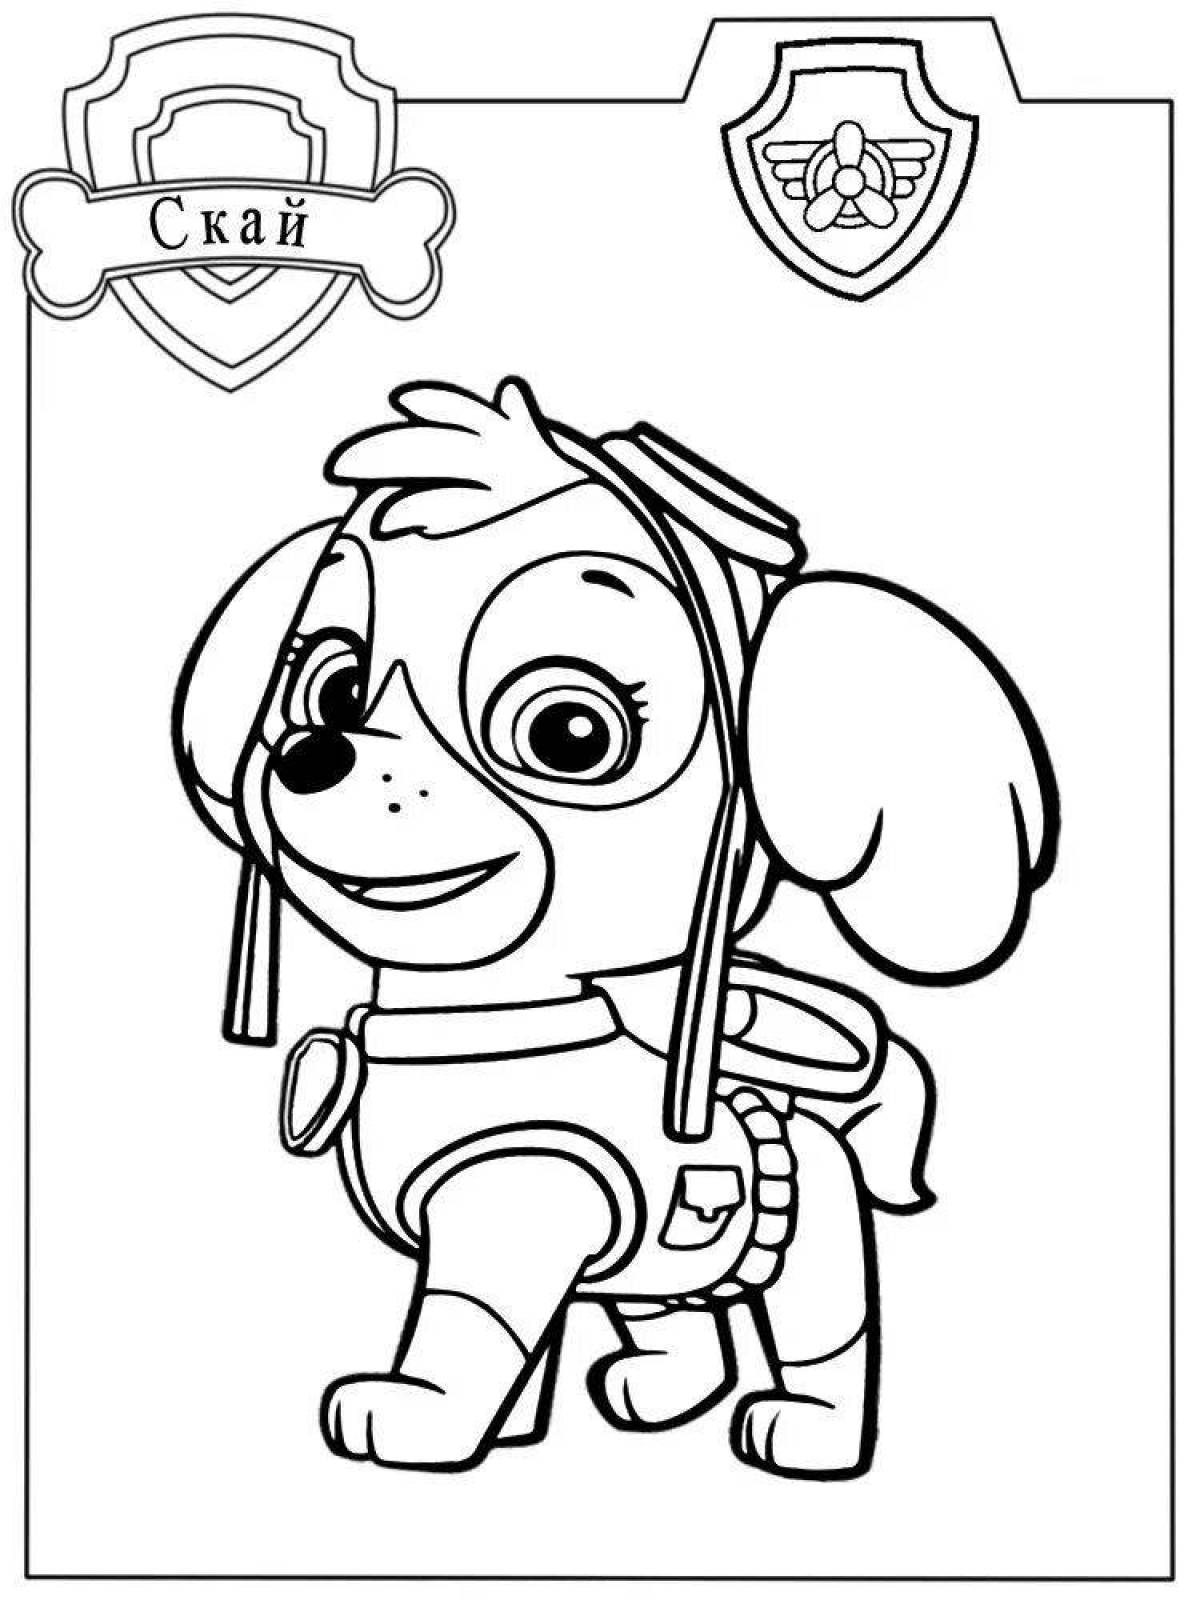 Snuggly coloring page skye puppy